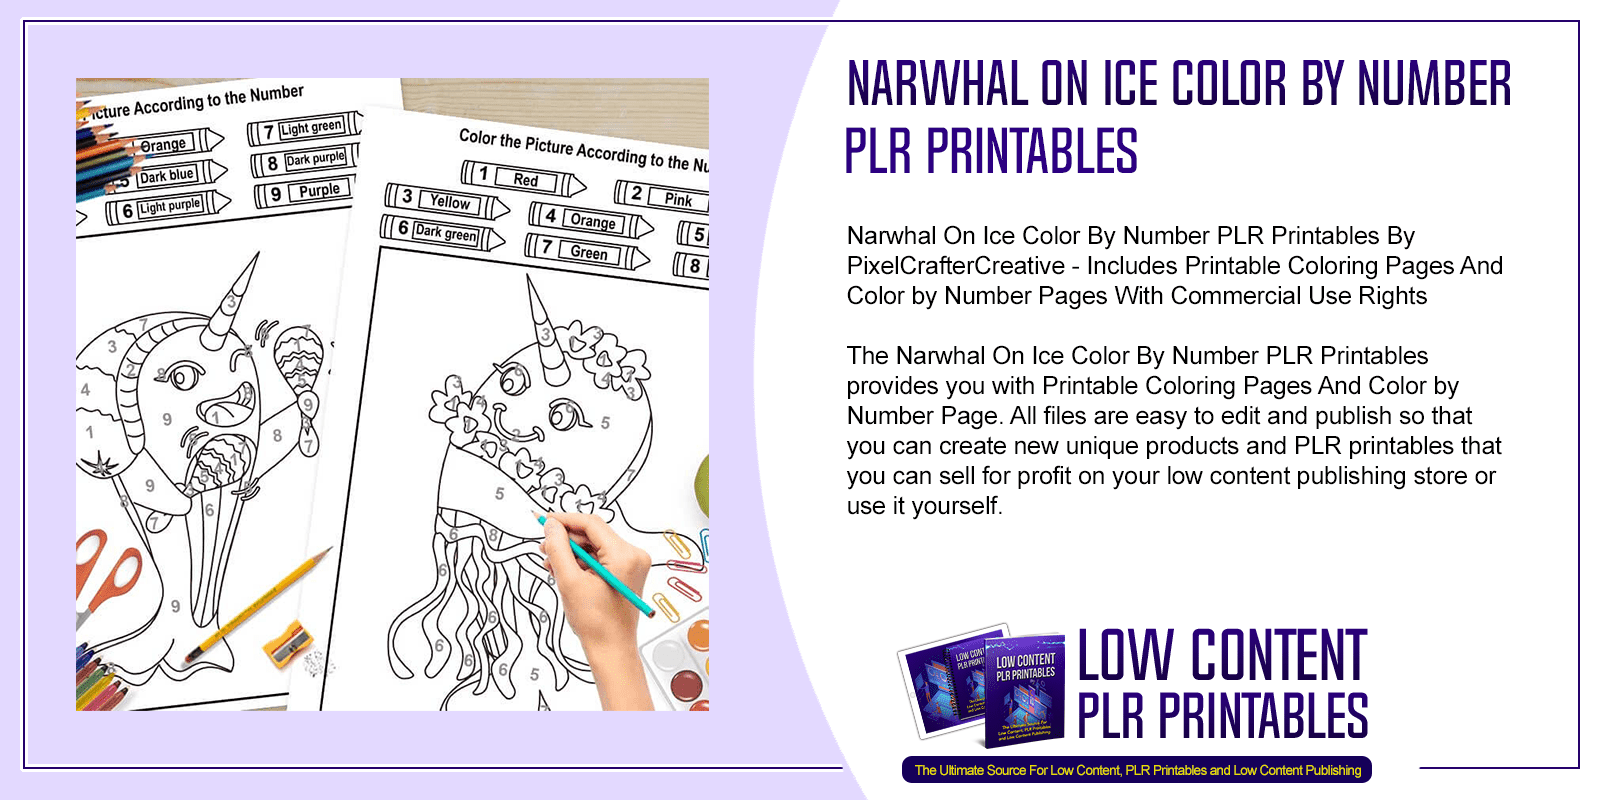 Narwhal On Ice Color By Number PLR Printables